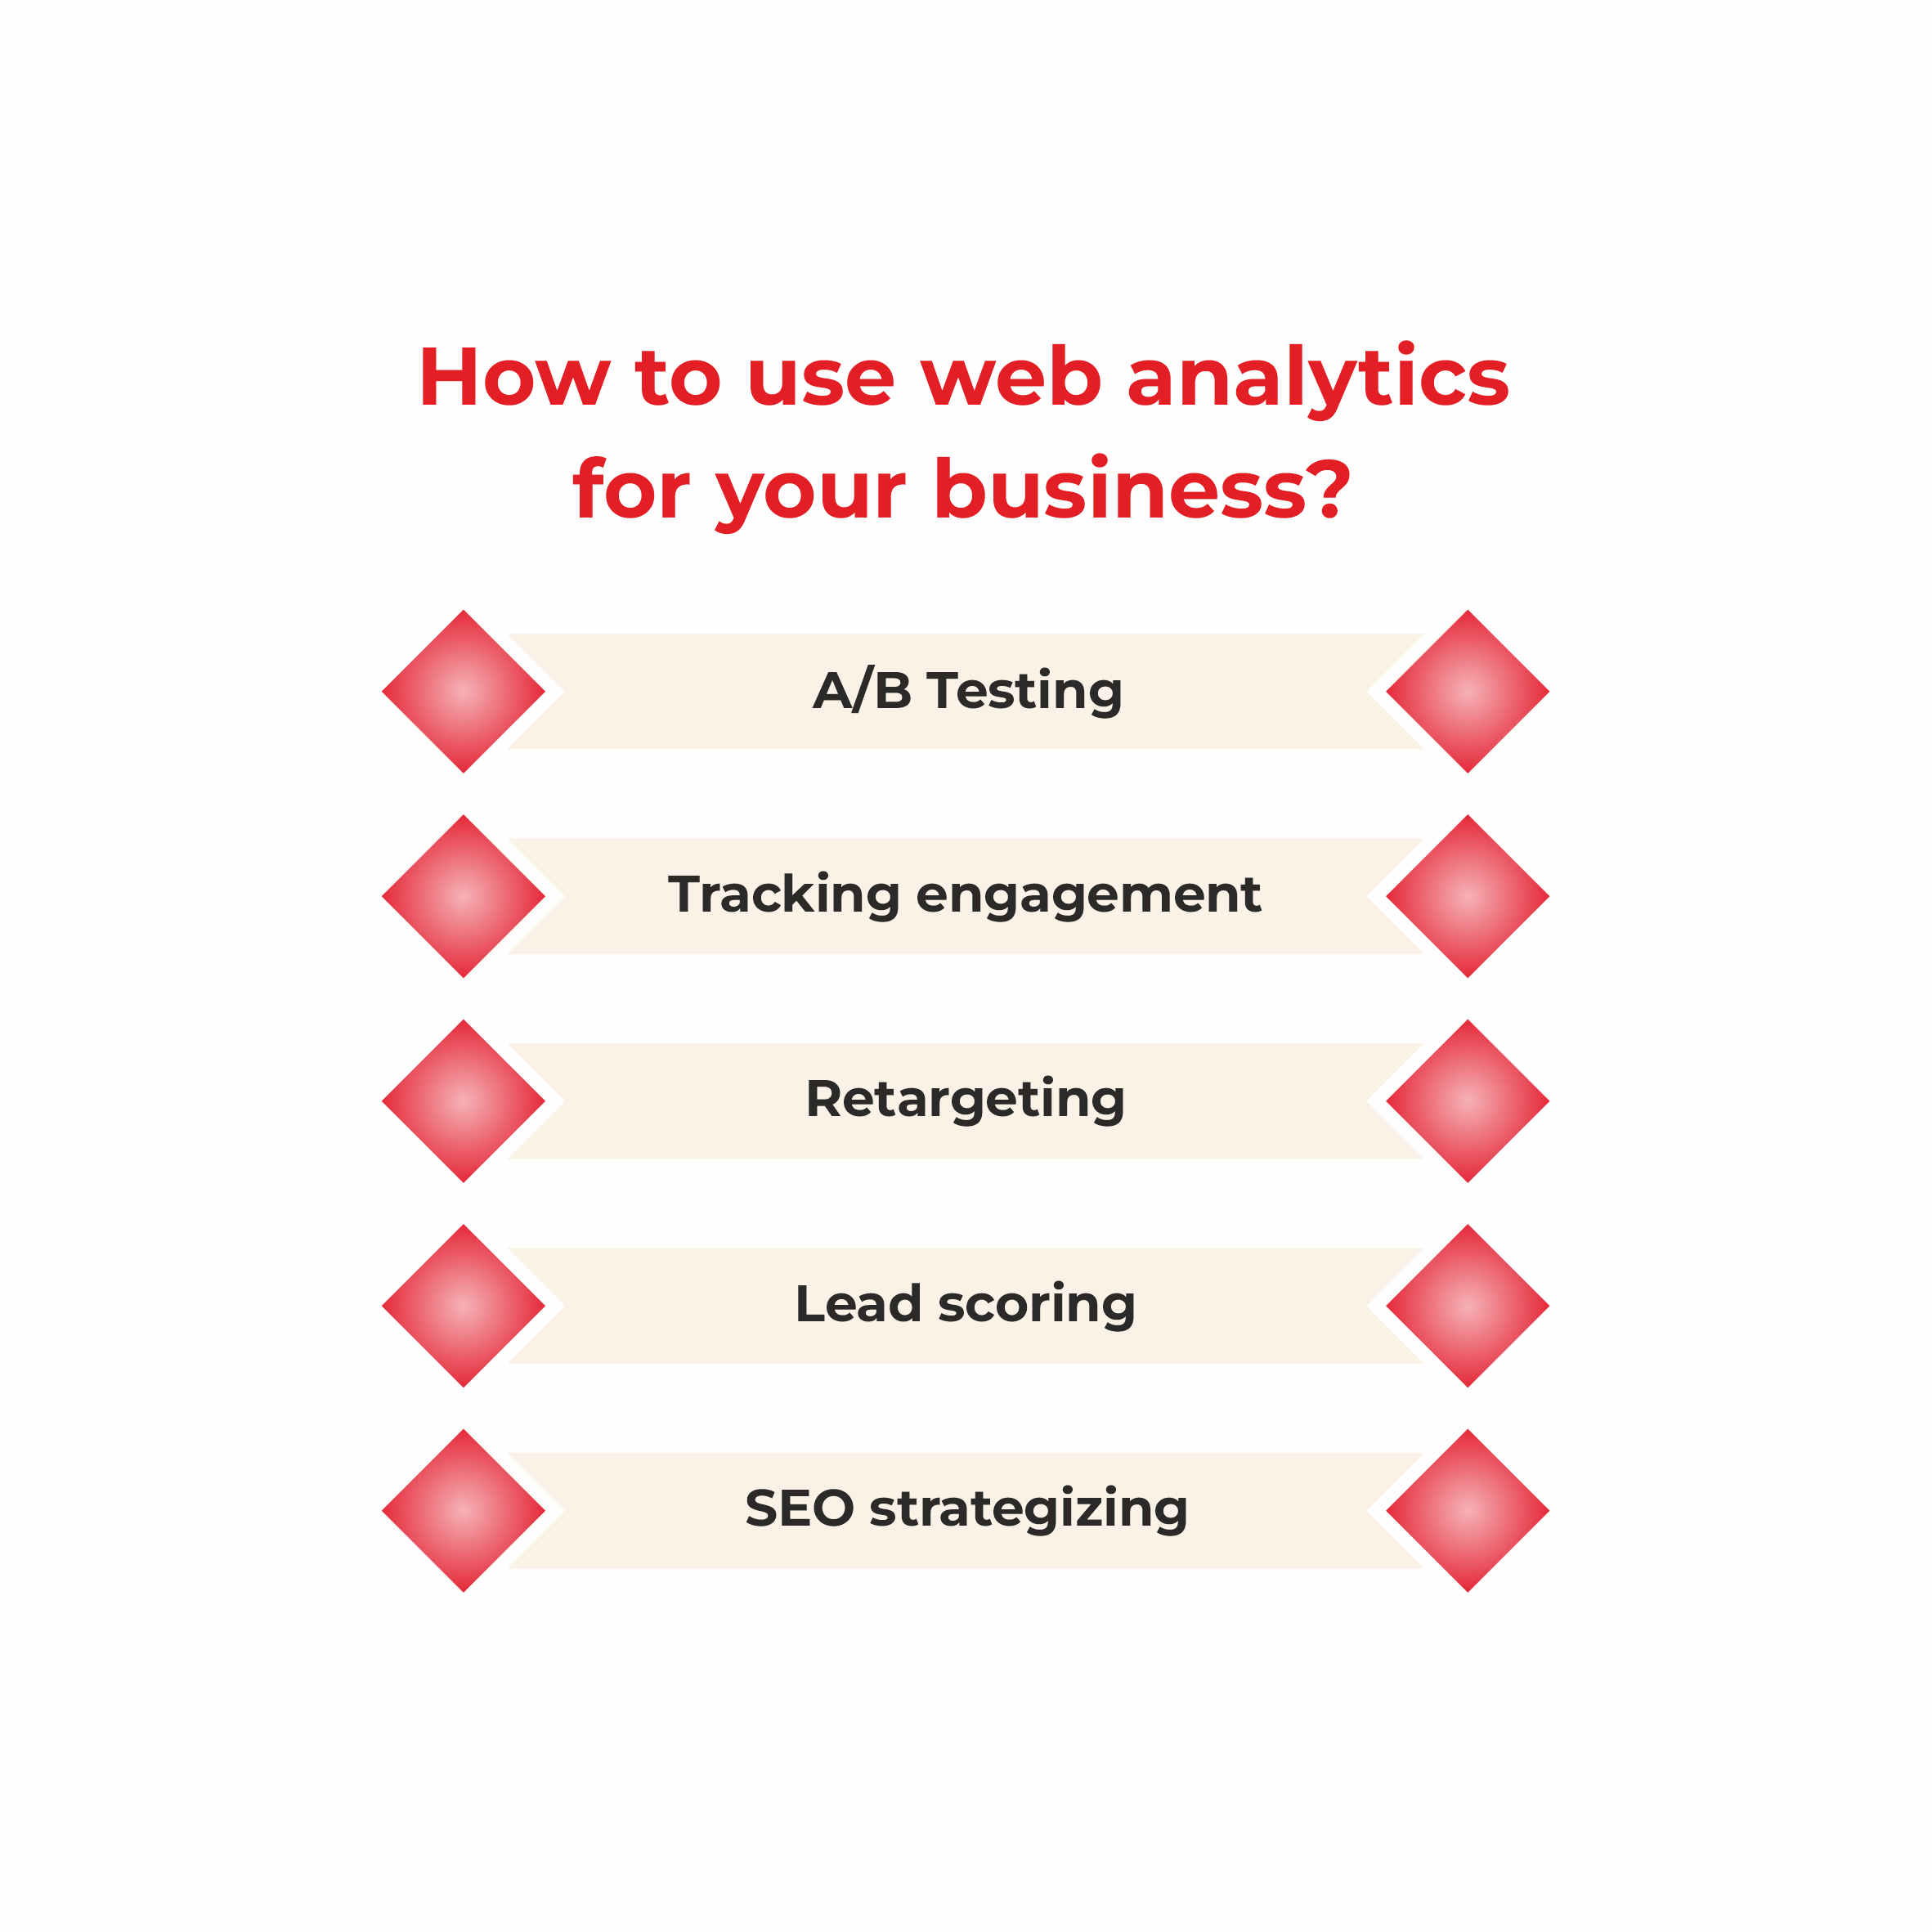 How to use web analytics for your business